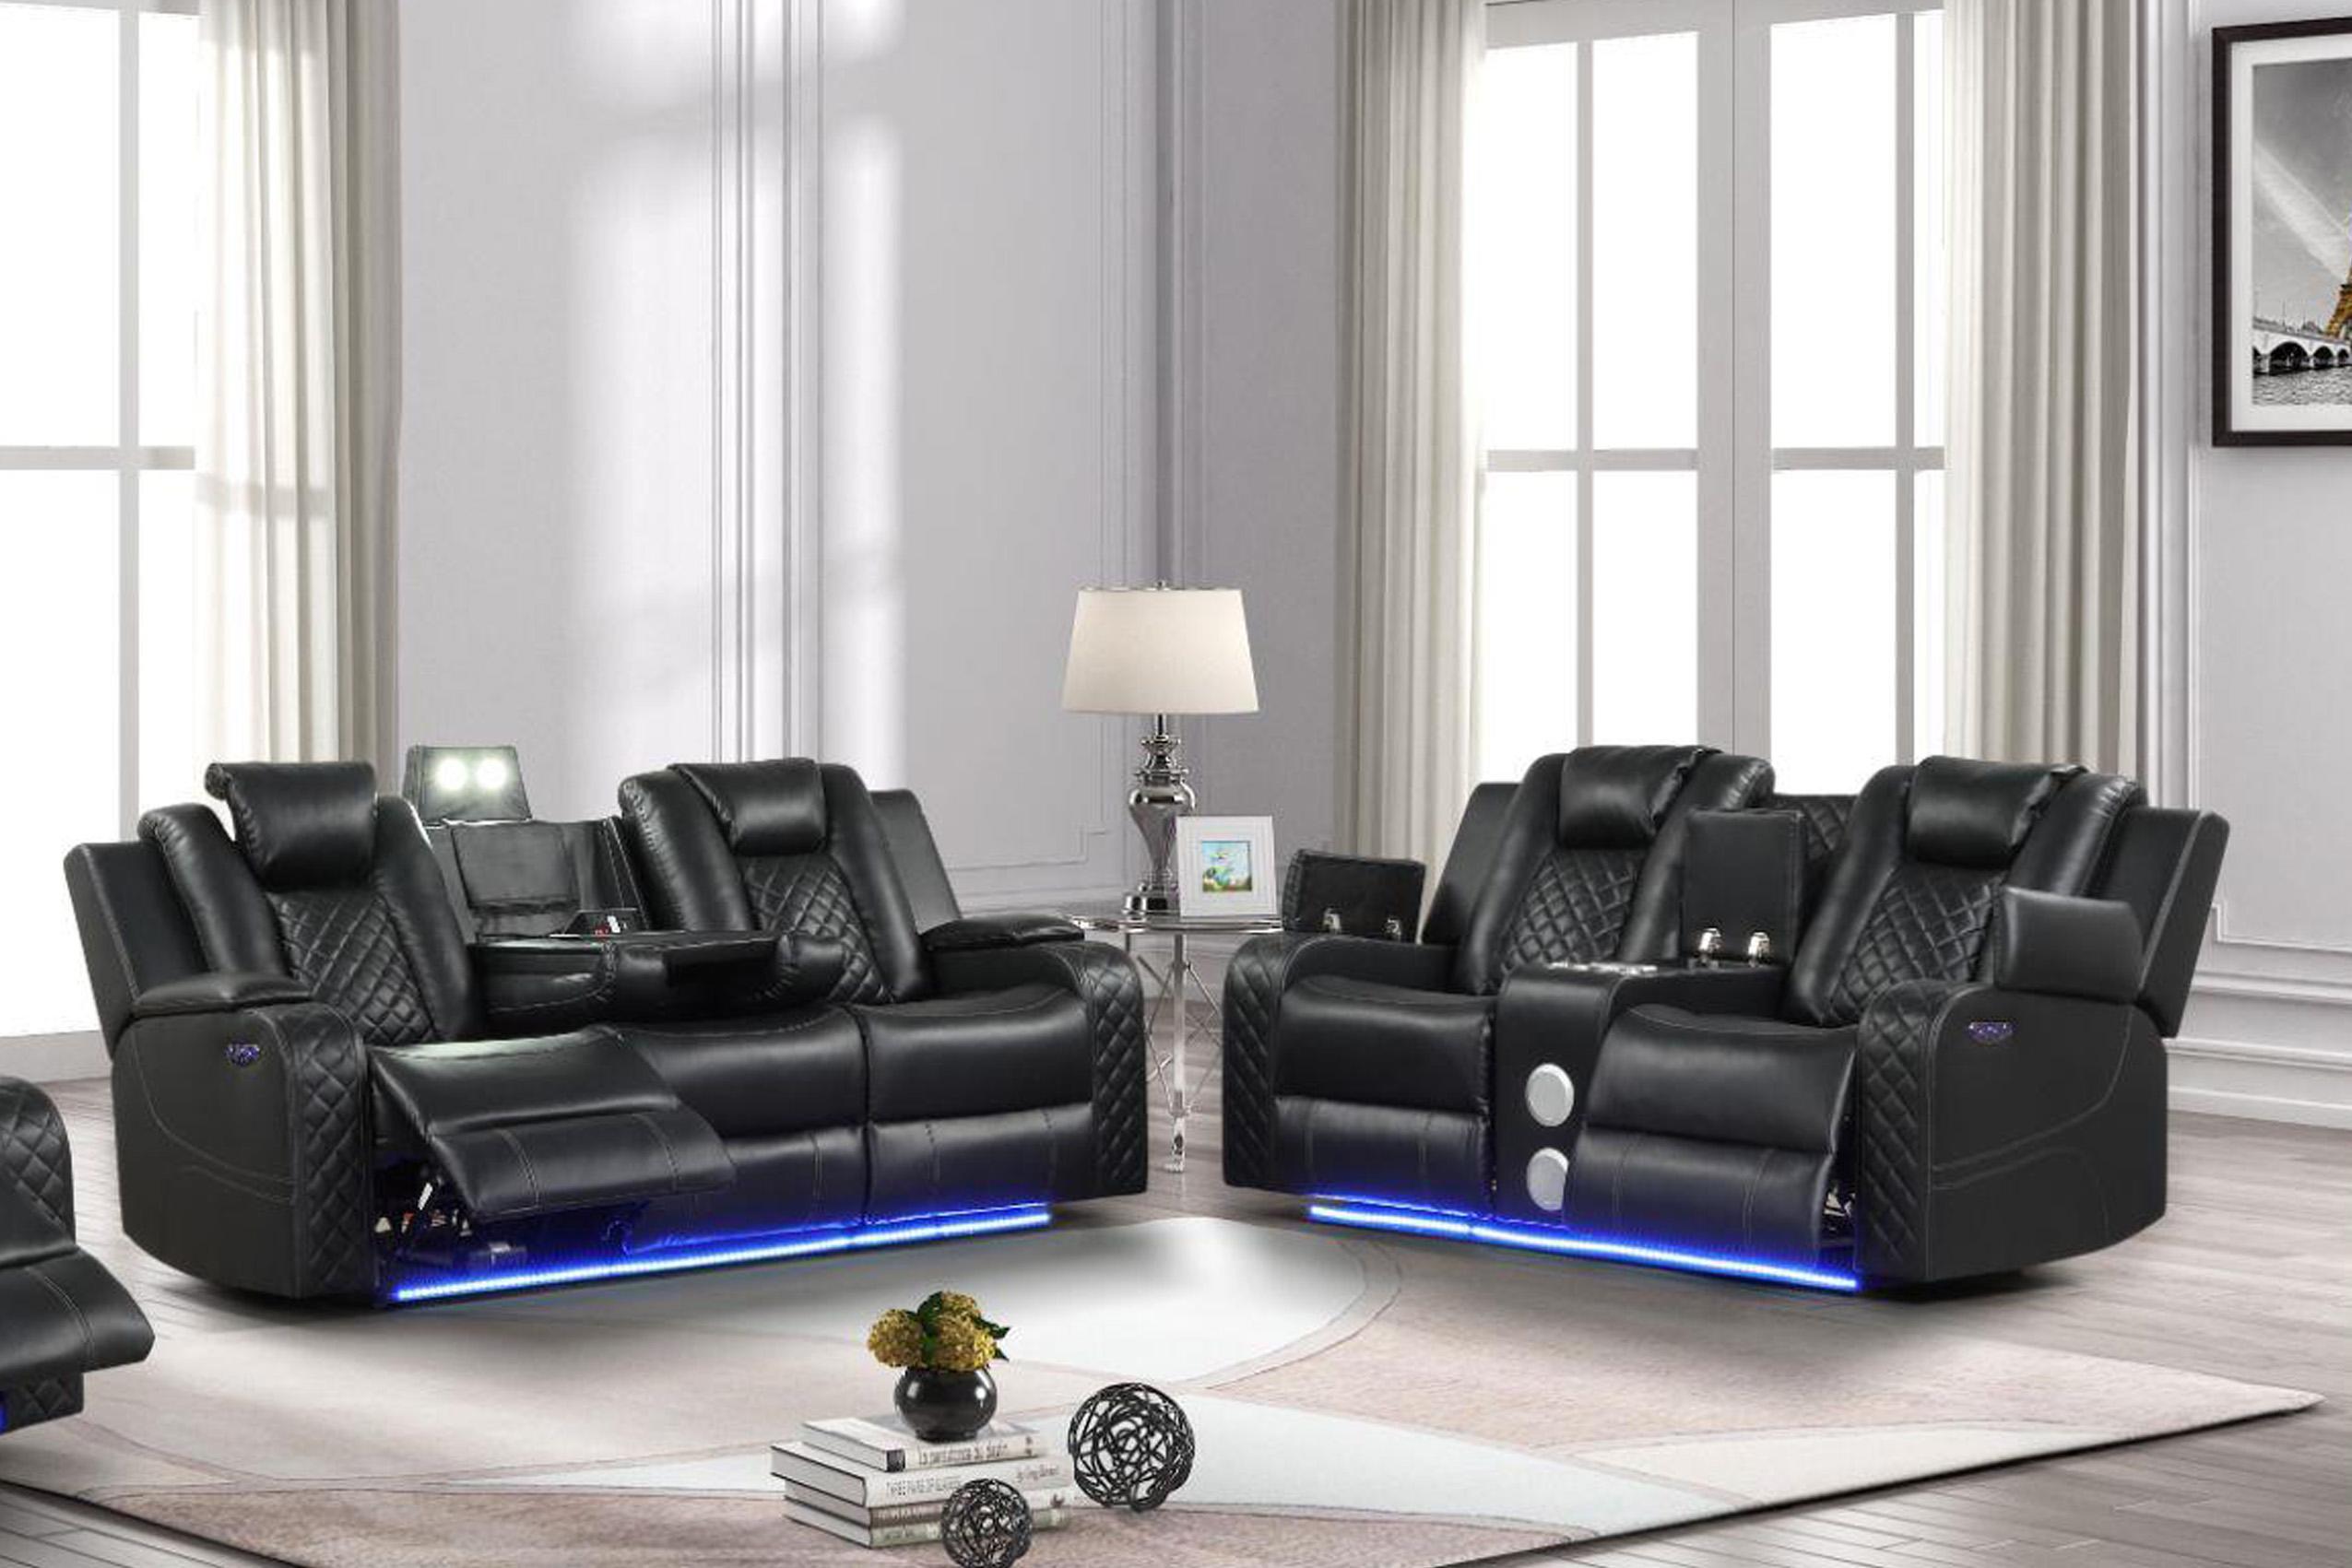 Contemporary, Modern Recliner Sofa Set BENZ 659436330924-2PC in Black Faux Leather